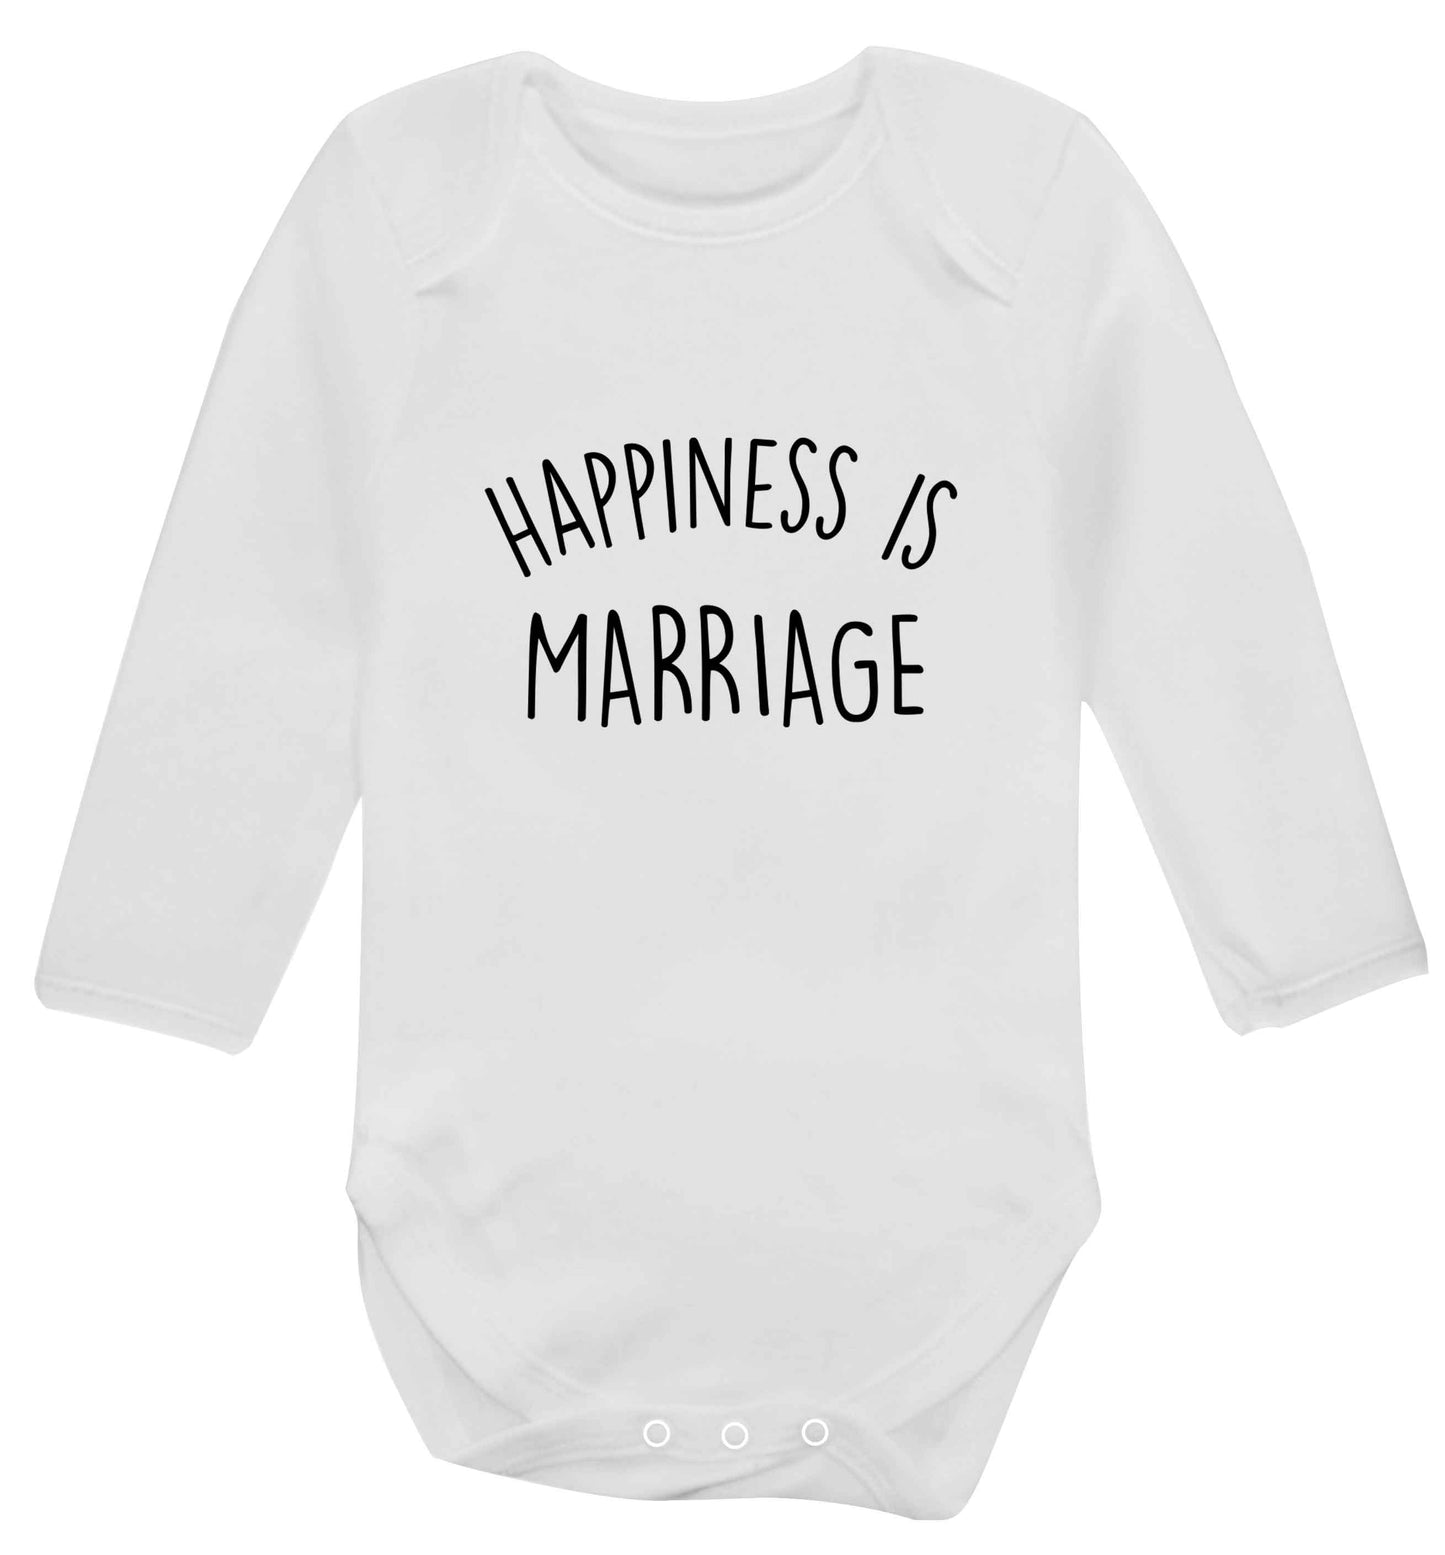 Happiness is wedding planning baby vest long sleeved white 6-12 months